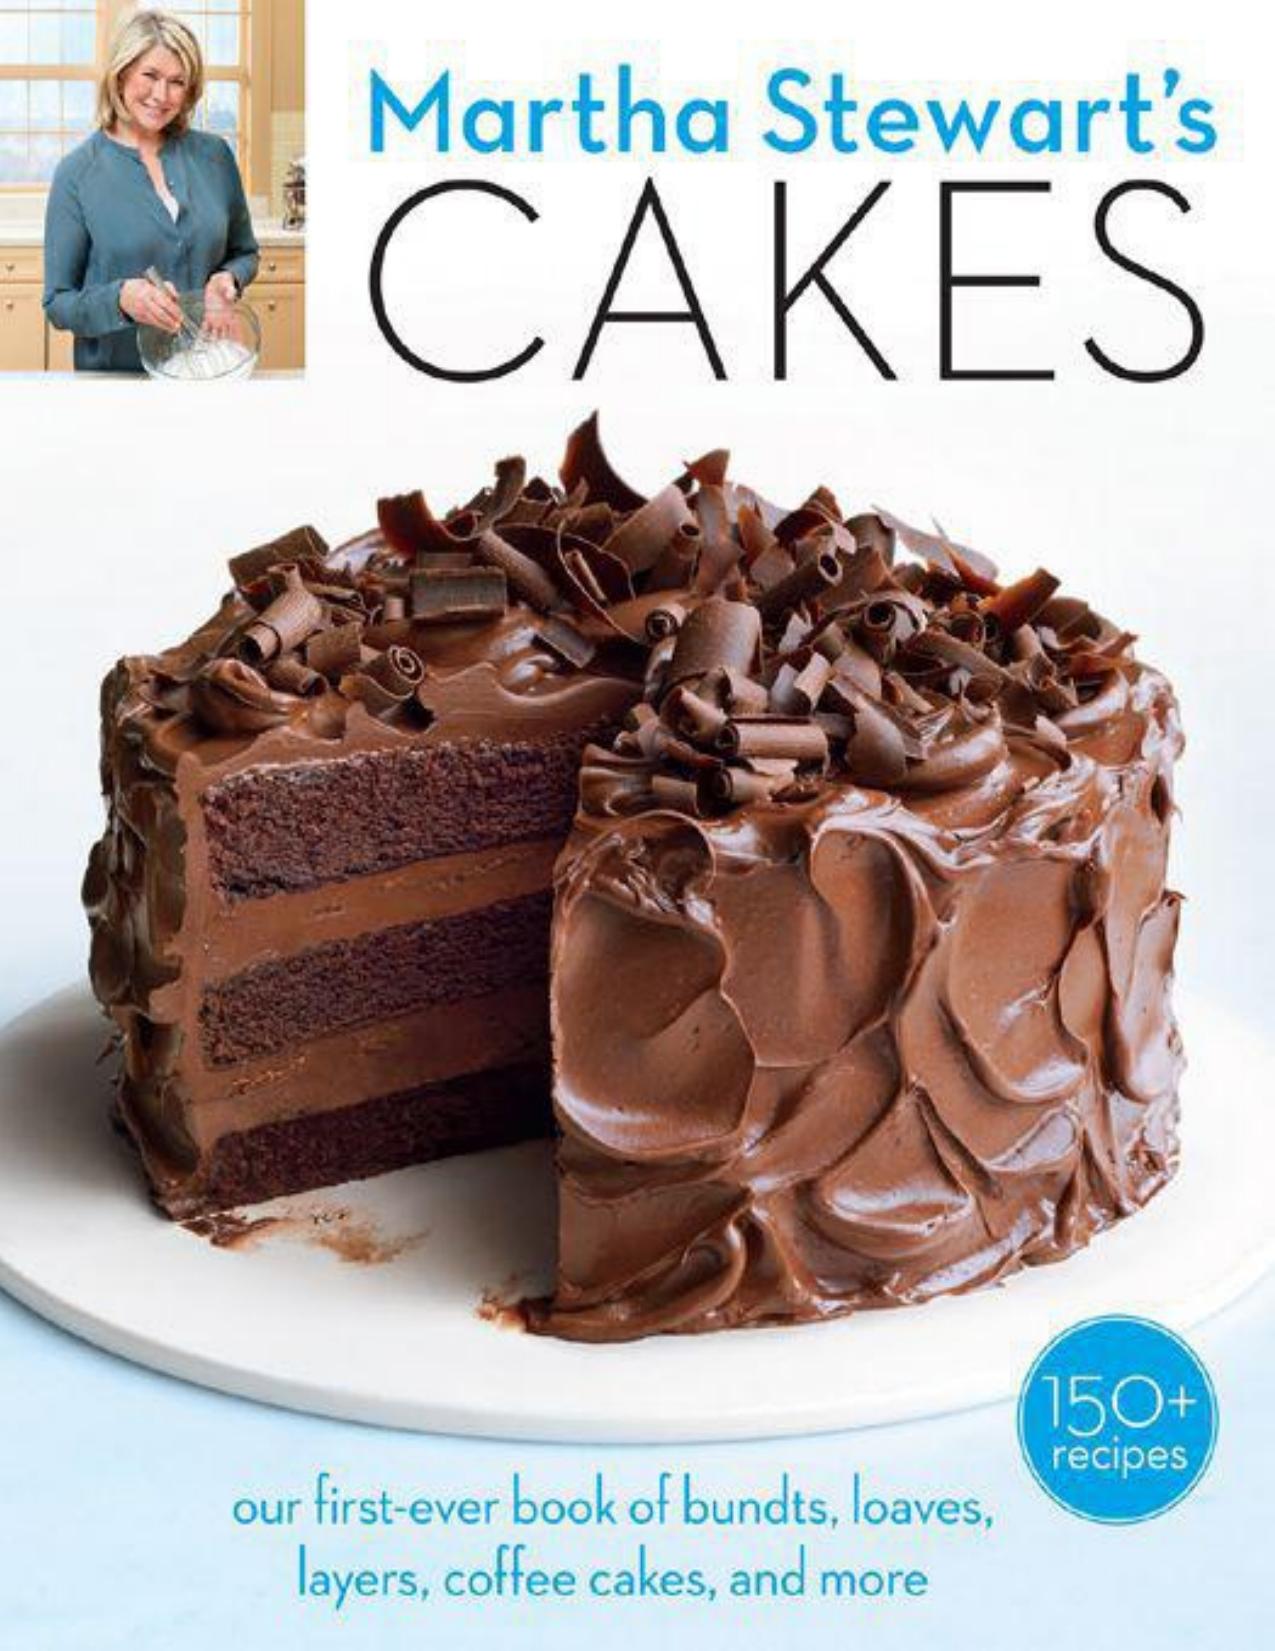 Martha Stewart's Cakes: Our First-Ever Book of Bundts, Loaves, Layers, Coffee Cakes, and more by Editors of Martha Stewart Living